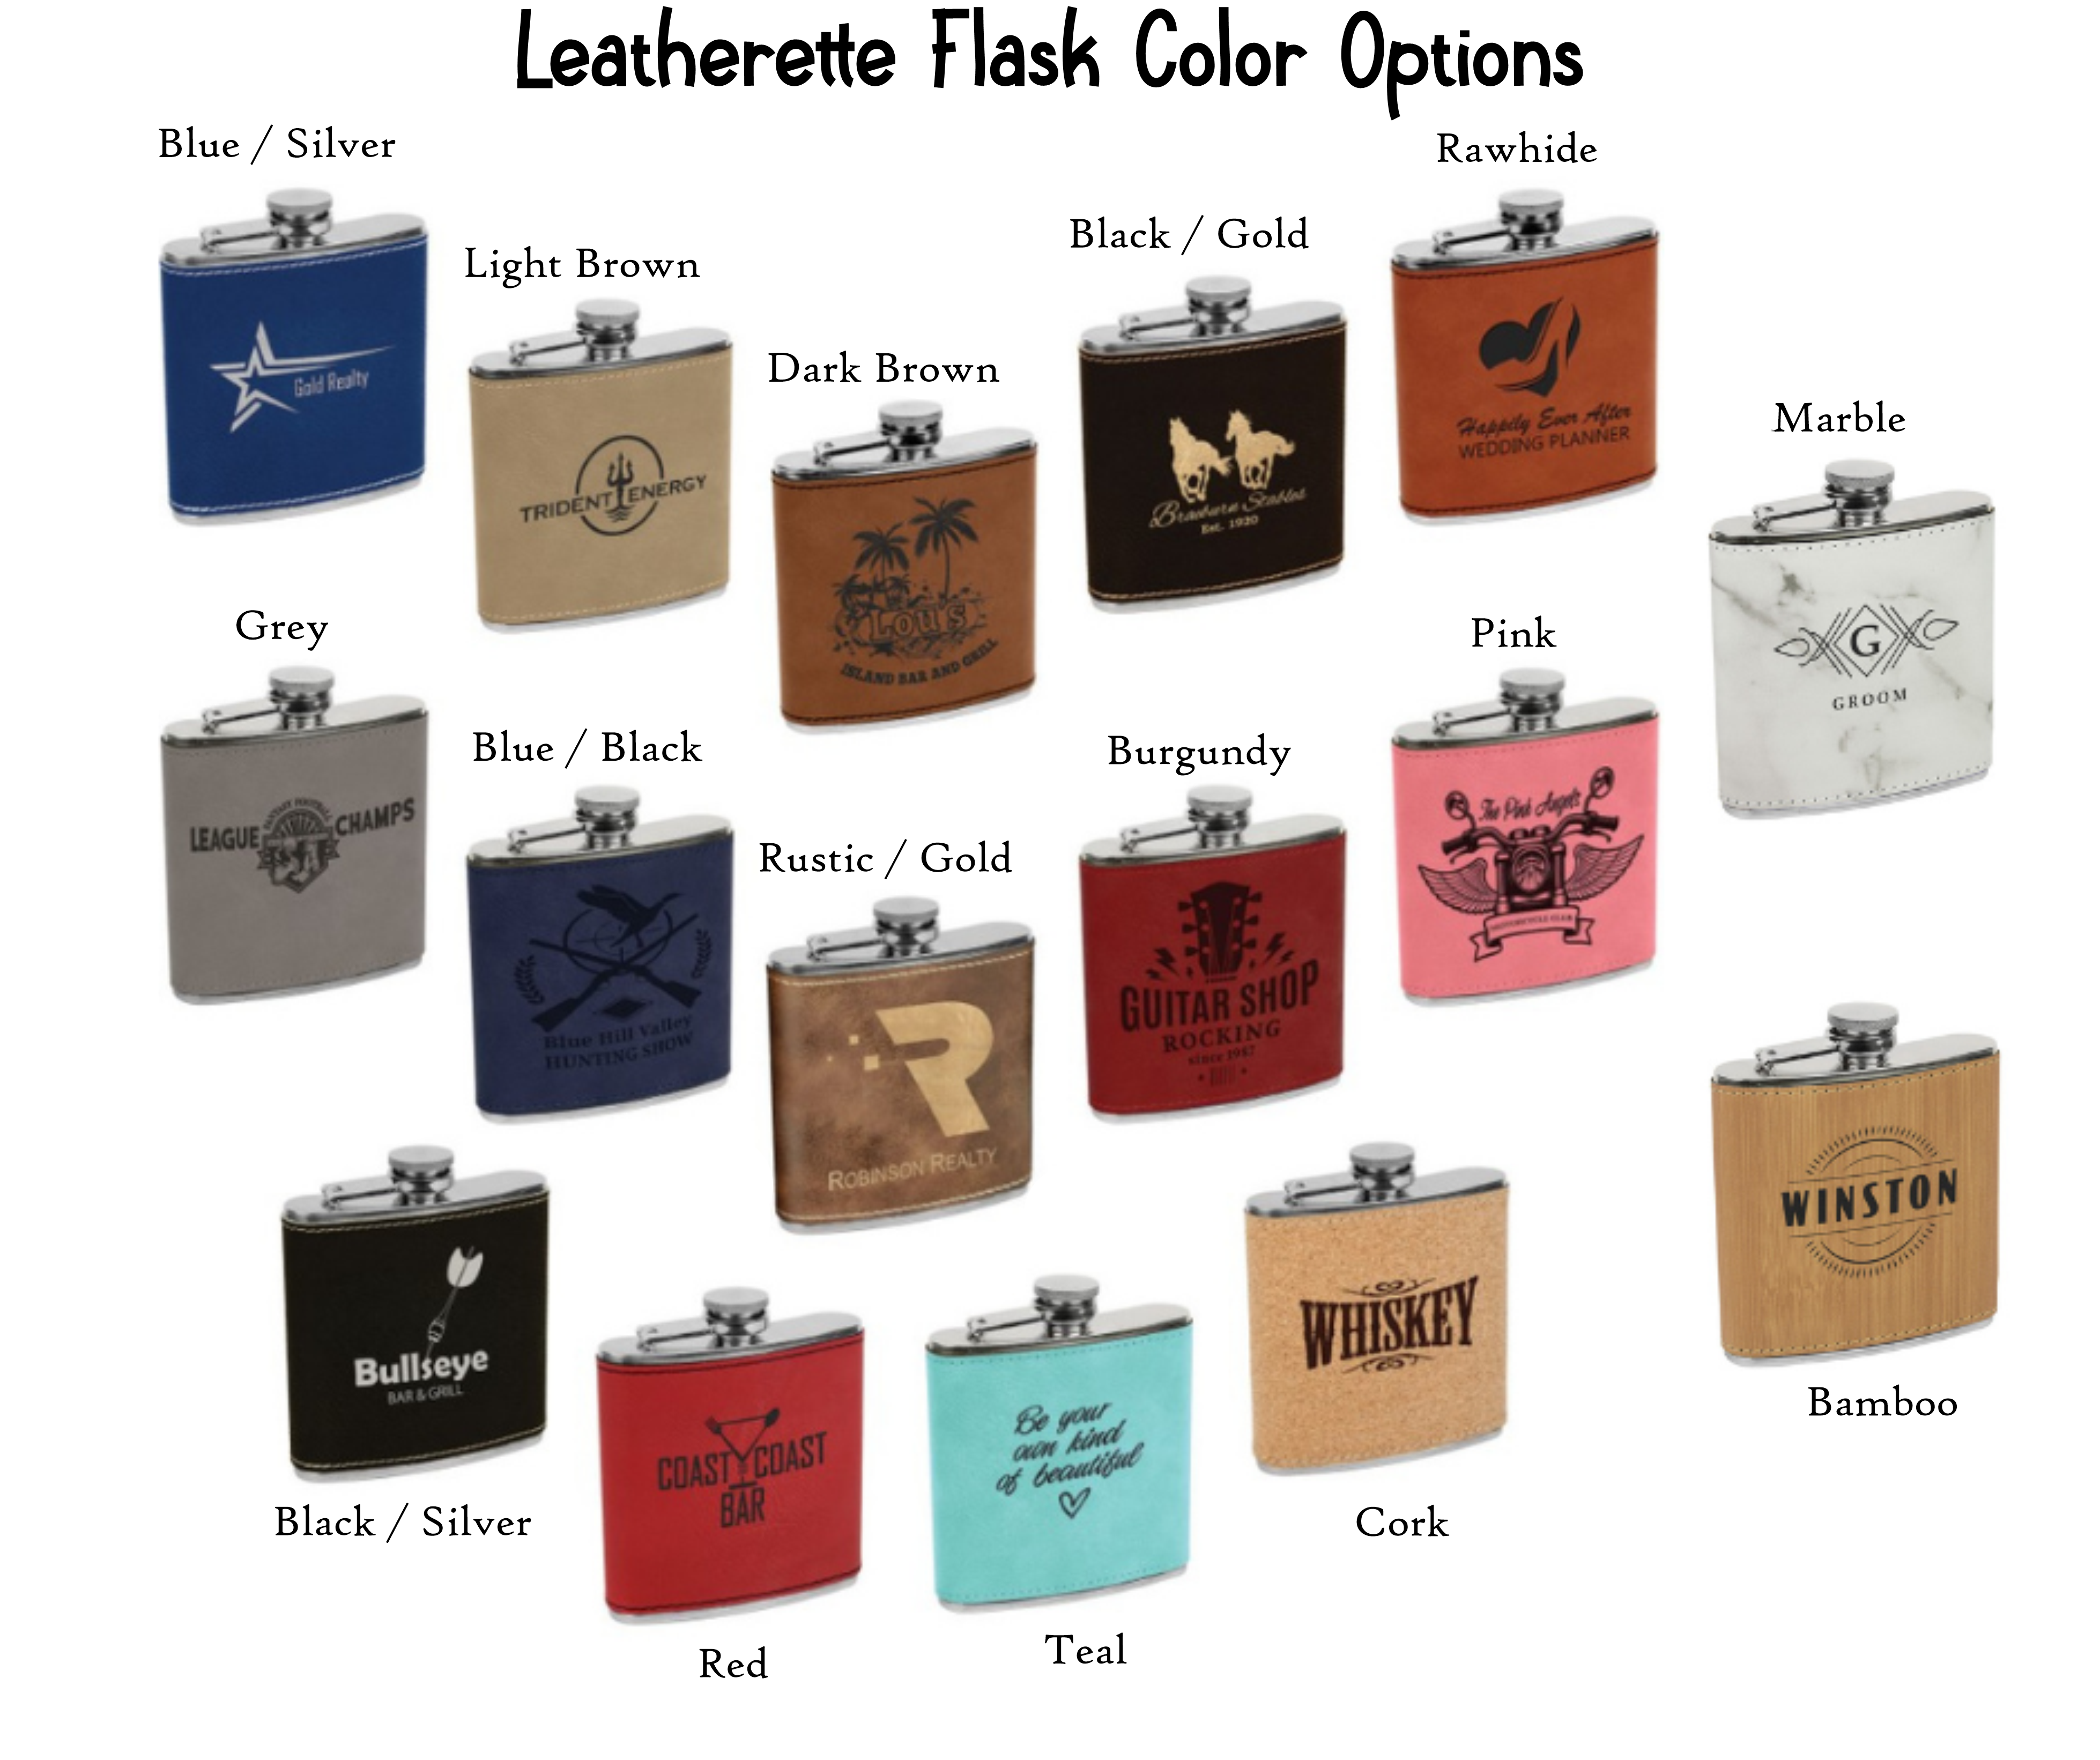 Hockey Wedding Party Flask - Metal or Leatherette